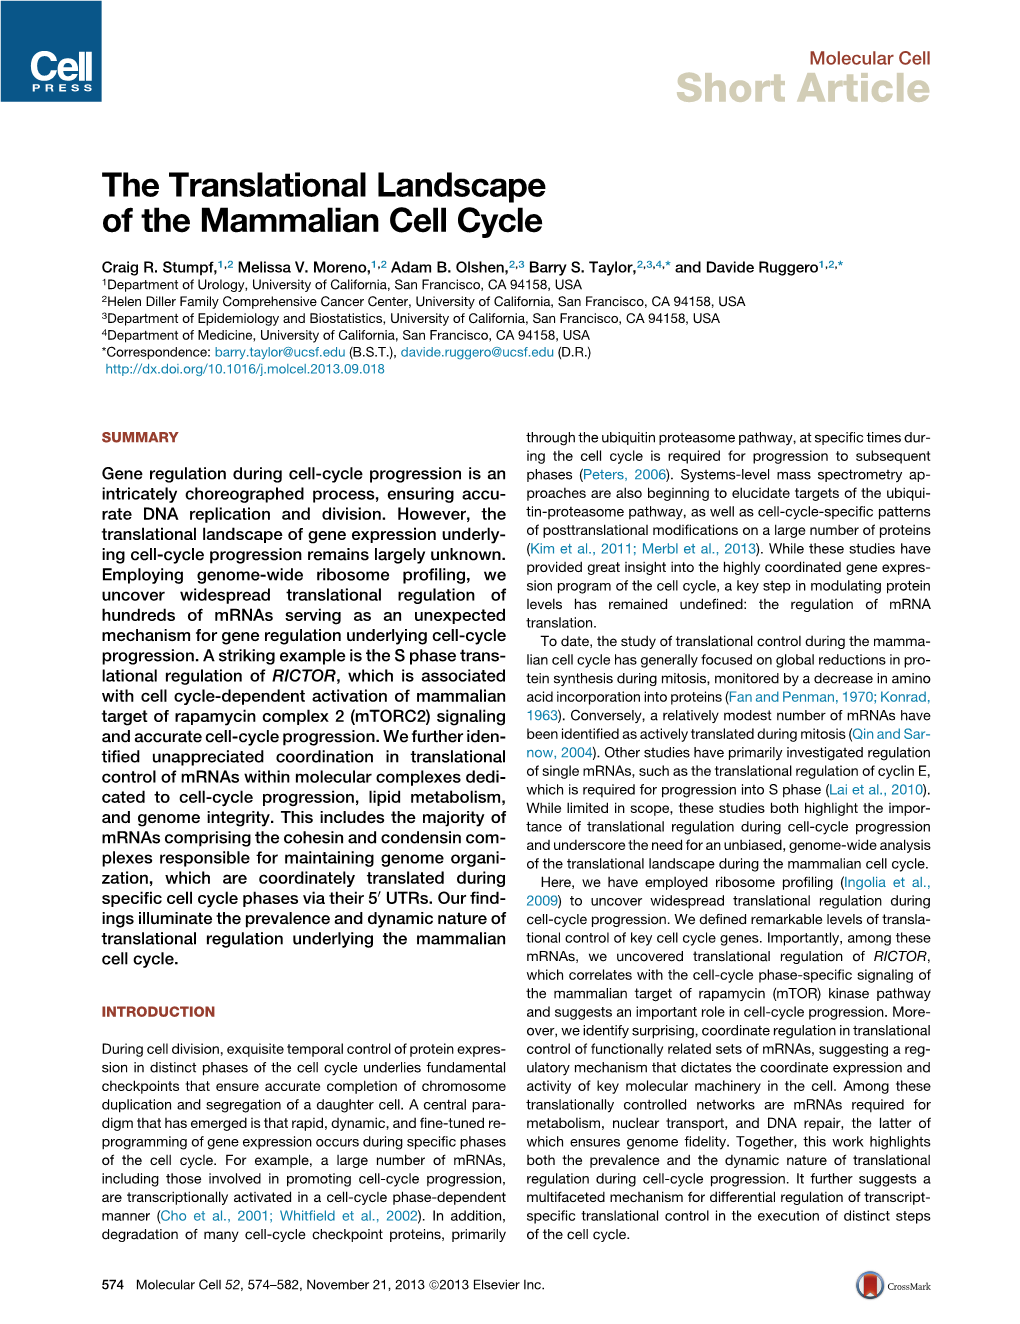 The Translational Landscape of the Mammalian Cell Cycle